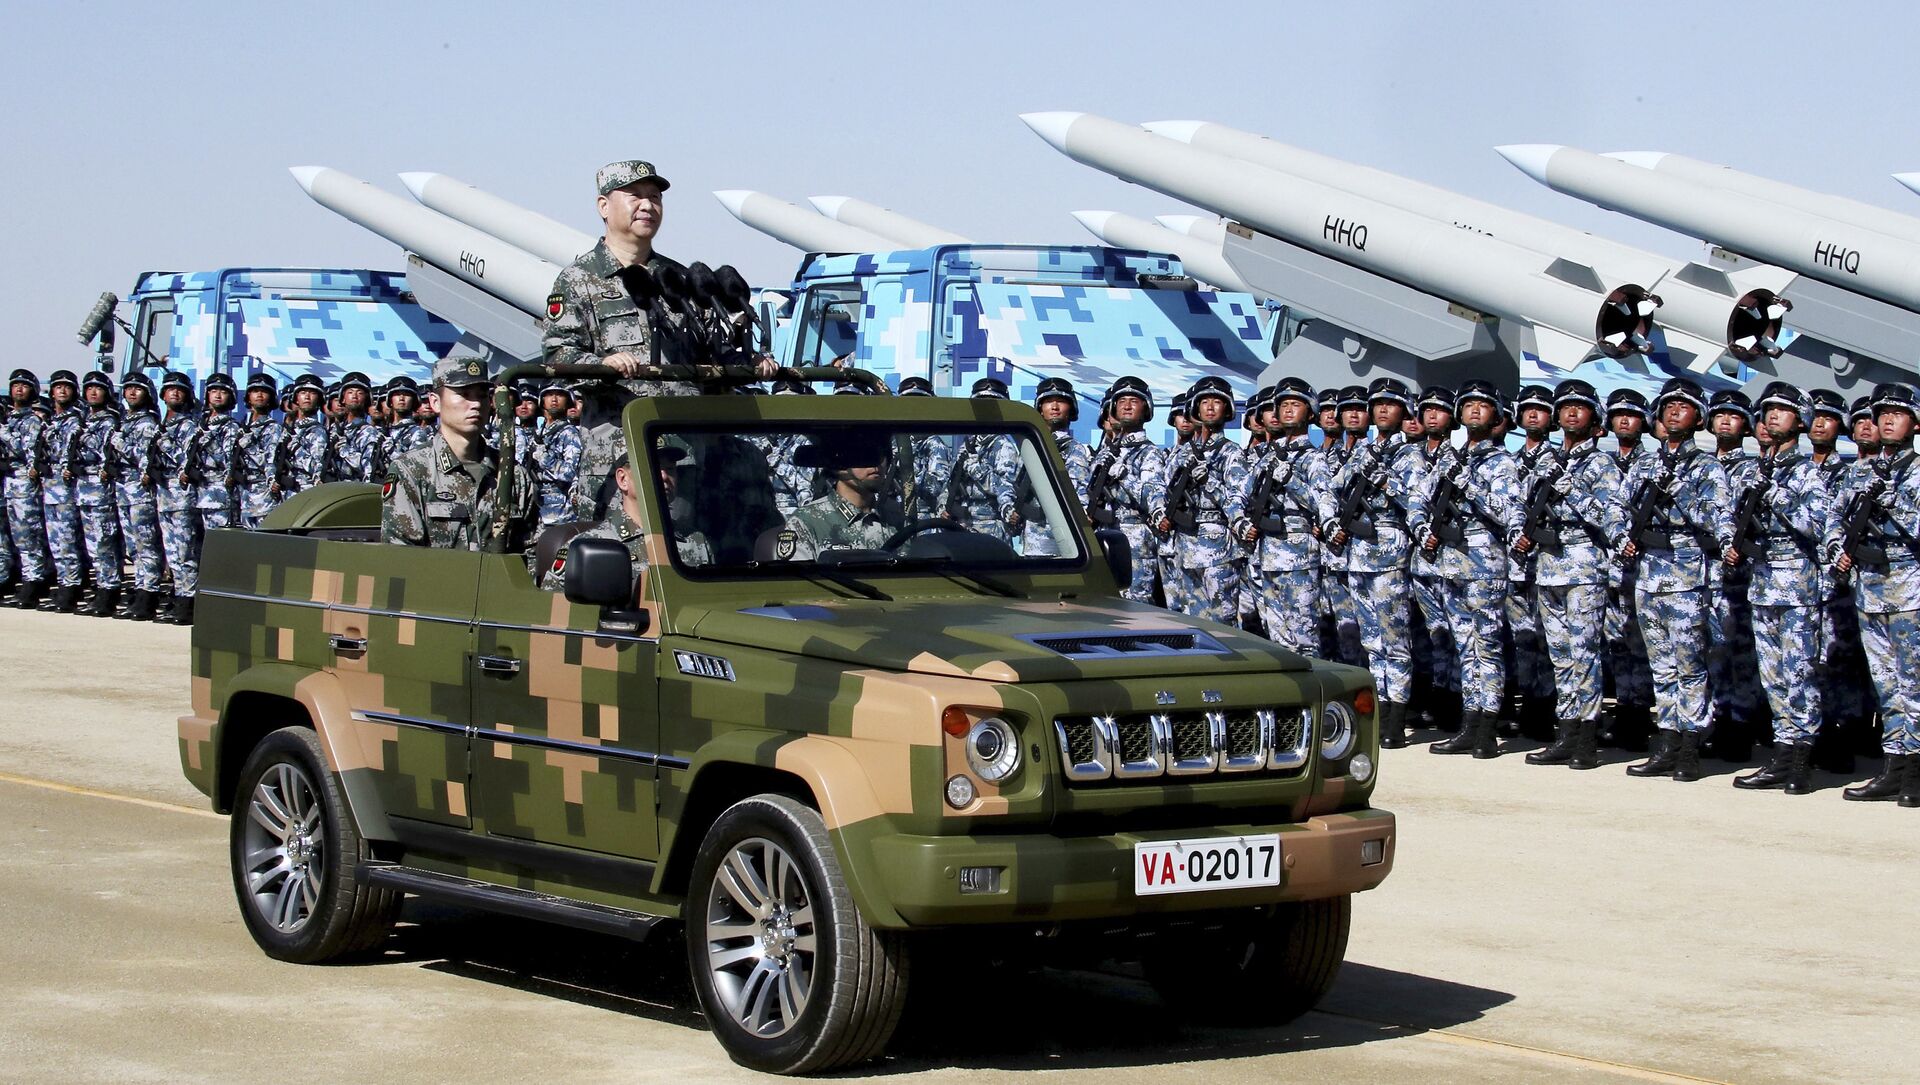 In this photo released by Xinhua News Agency, Chinese President Xi Jinping stands on a military jeep as he inspects troops of the People's Liberation Army during a military parade to commemorate the 90th anniversary of the founding of the PLA at Zhurihe training base in north China's Inner Mongolia Autonomous Region, Sunday, July 30, 2017 - Sputnik International, 1920, 09.03.2021